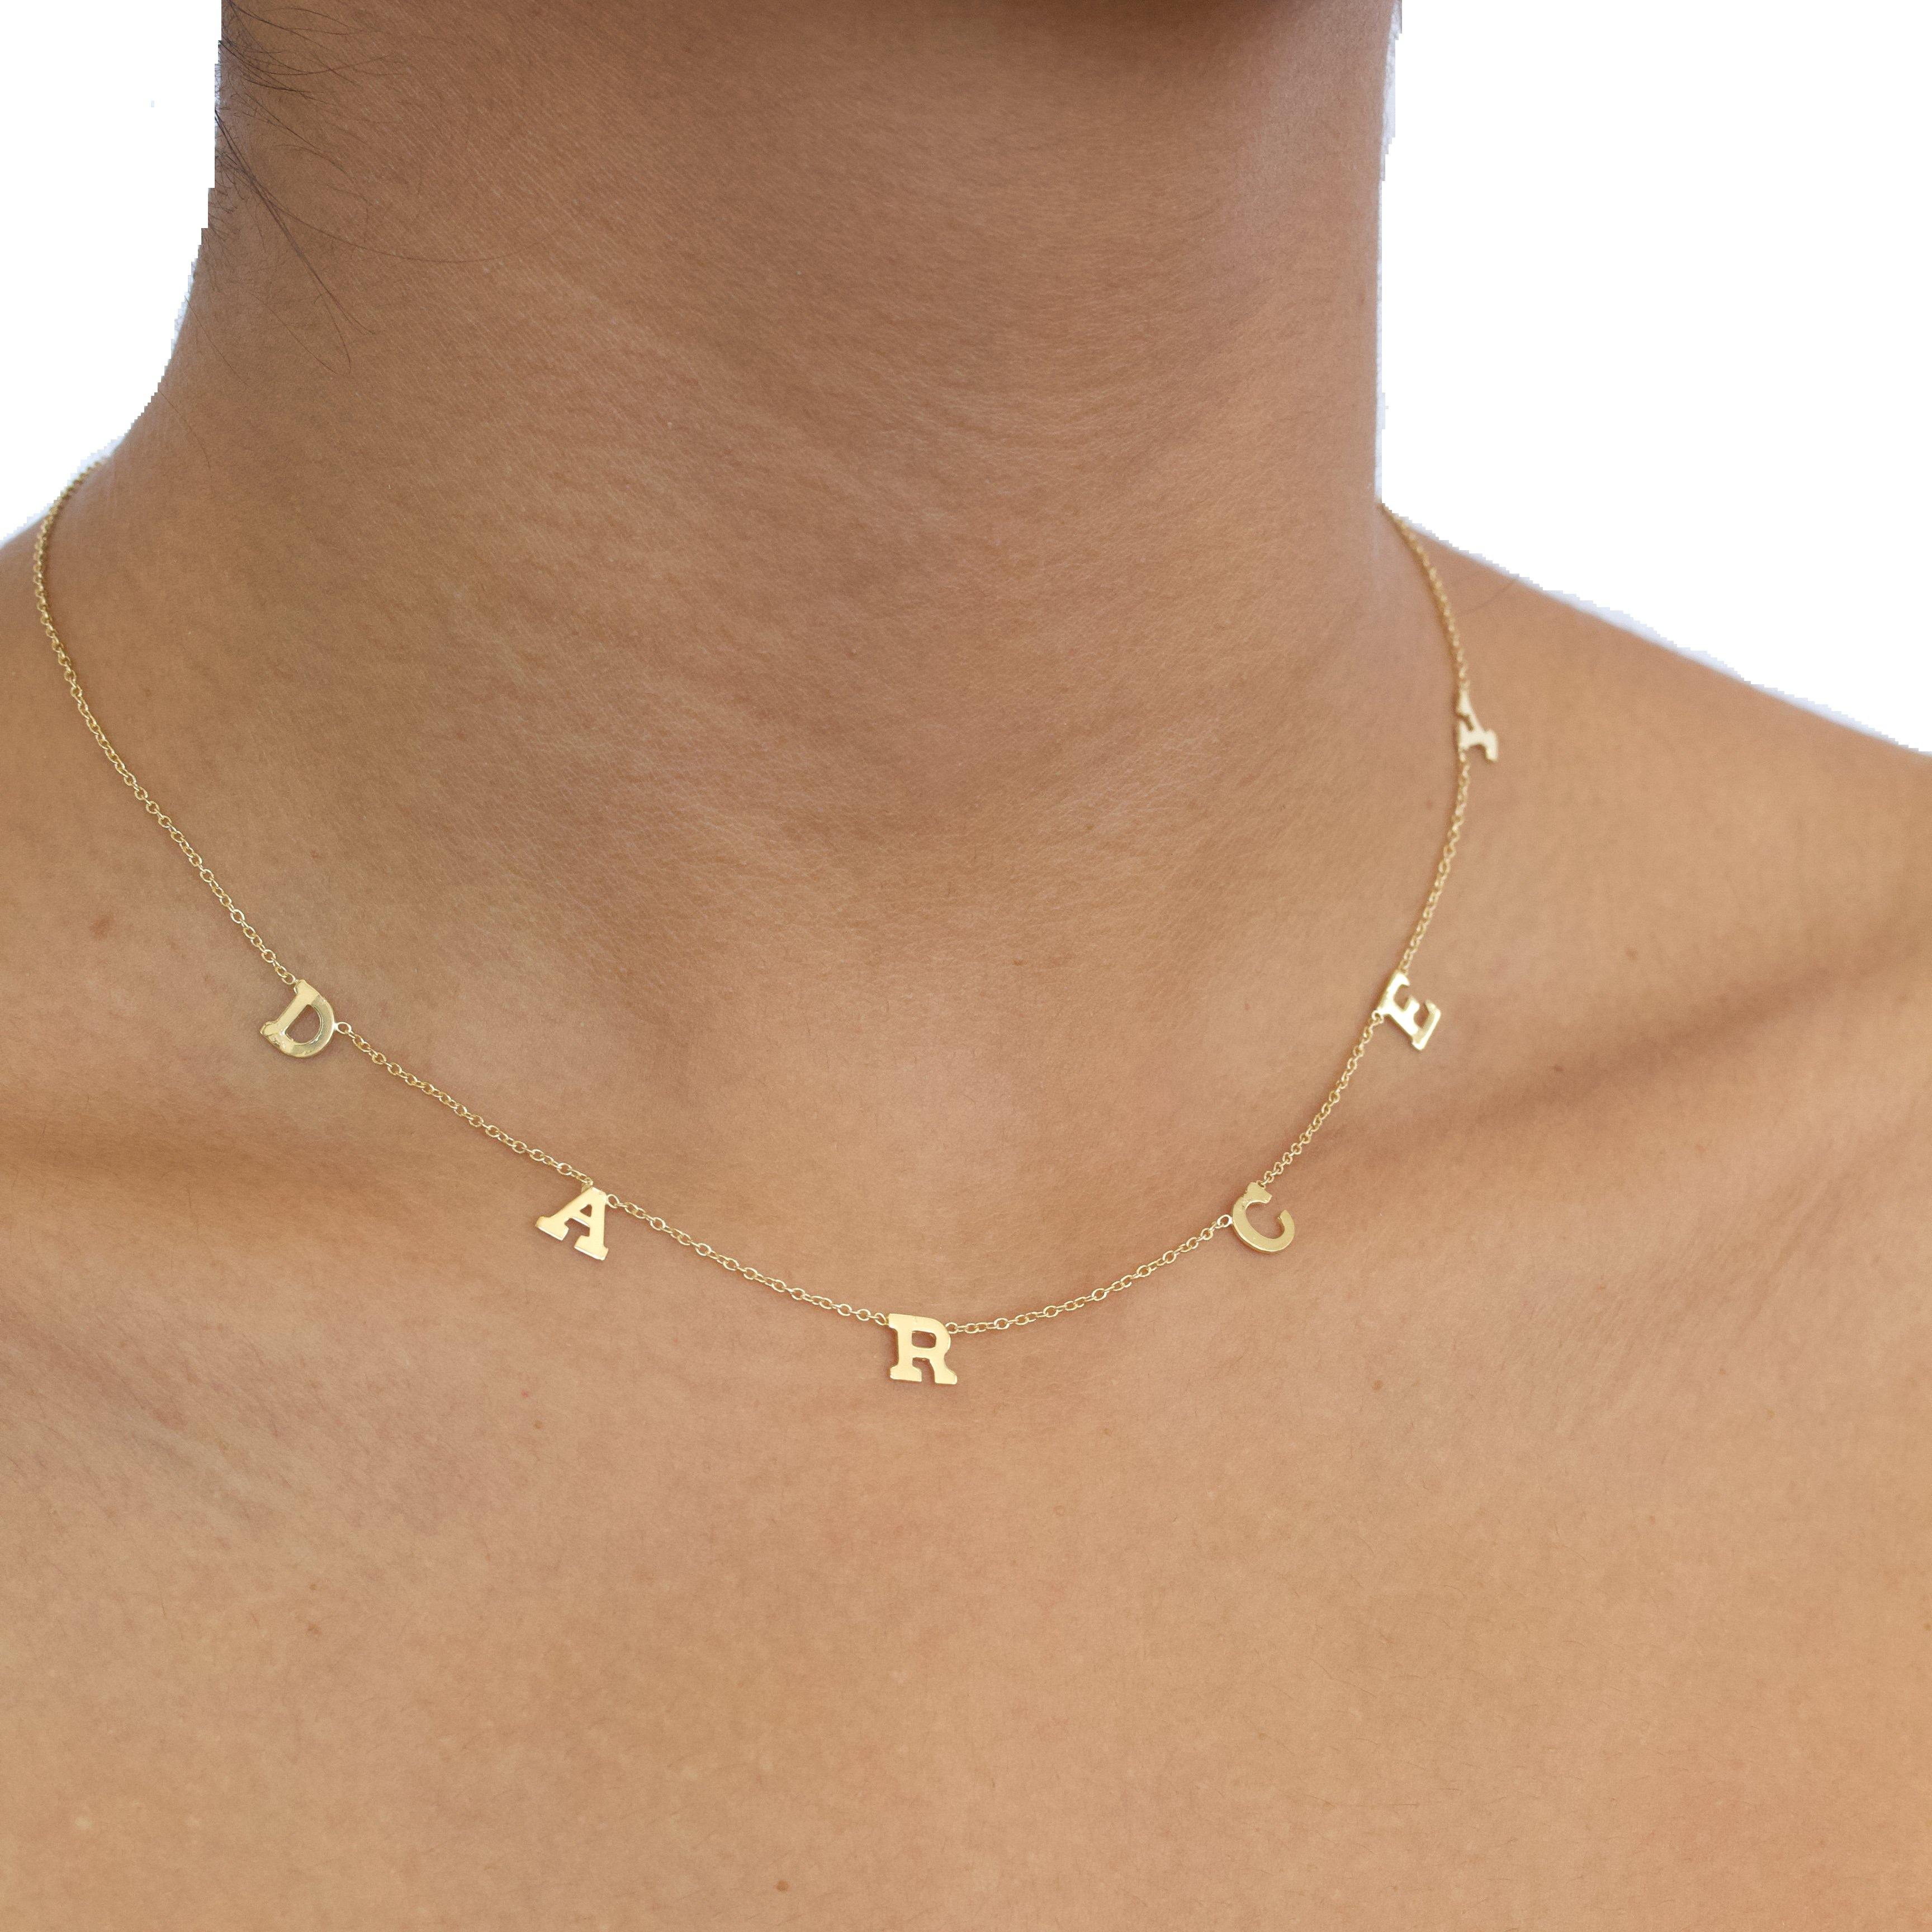 PERSONALIZED SPACED LETTER NECKLACE - bobbie carr